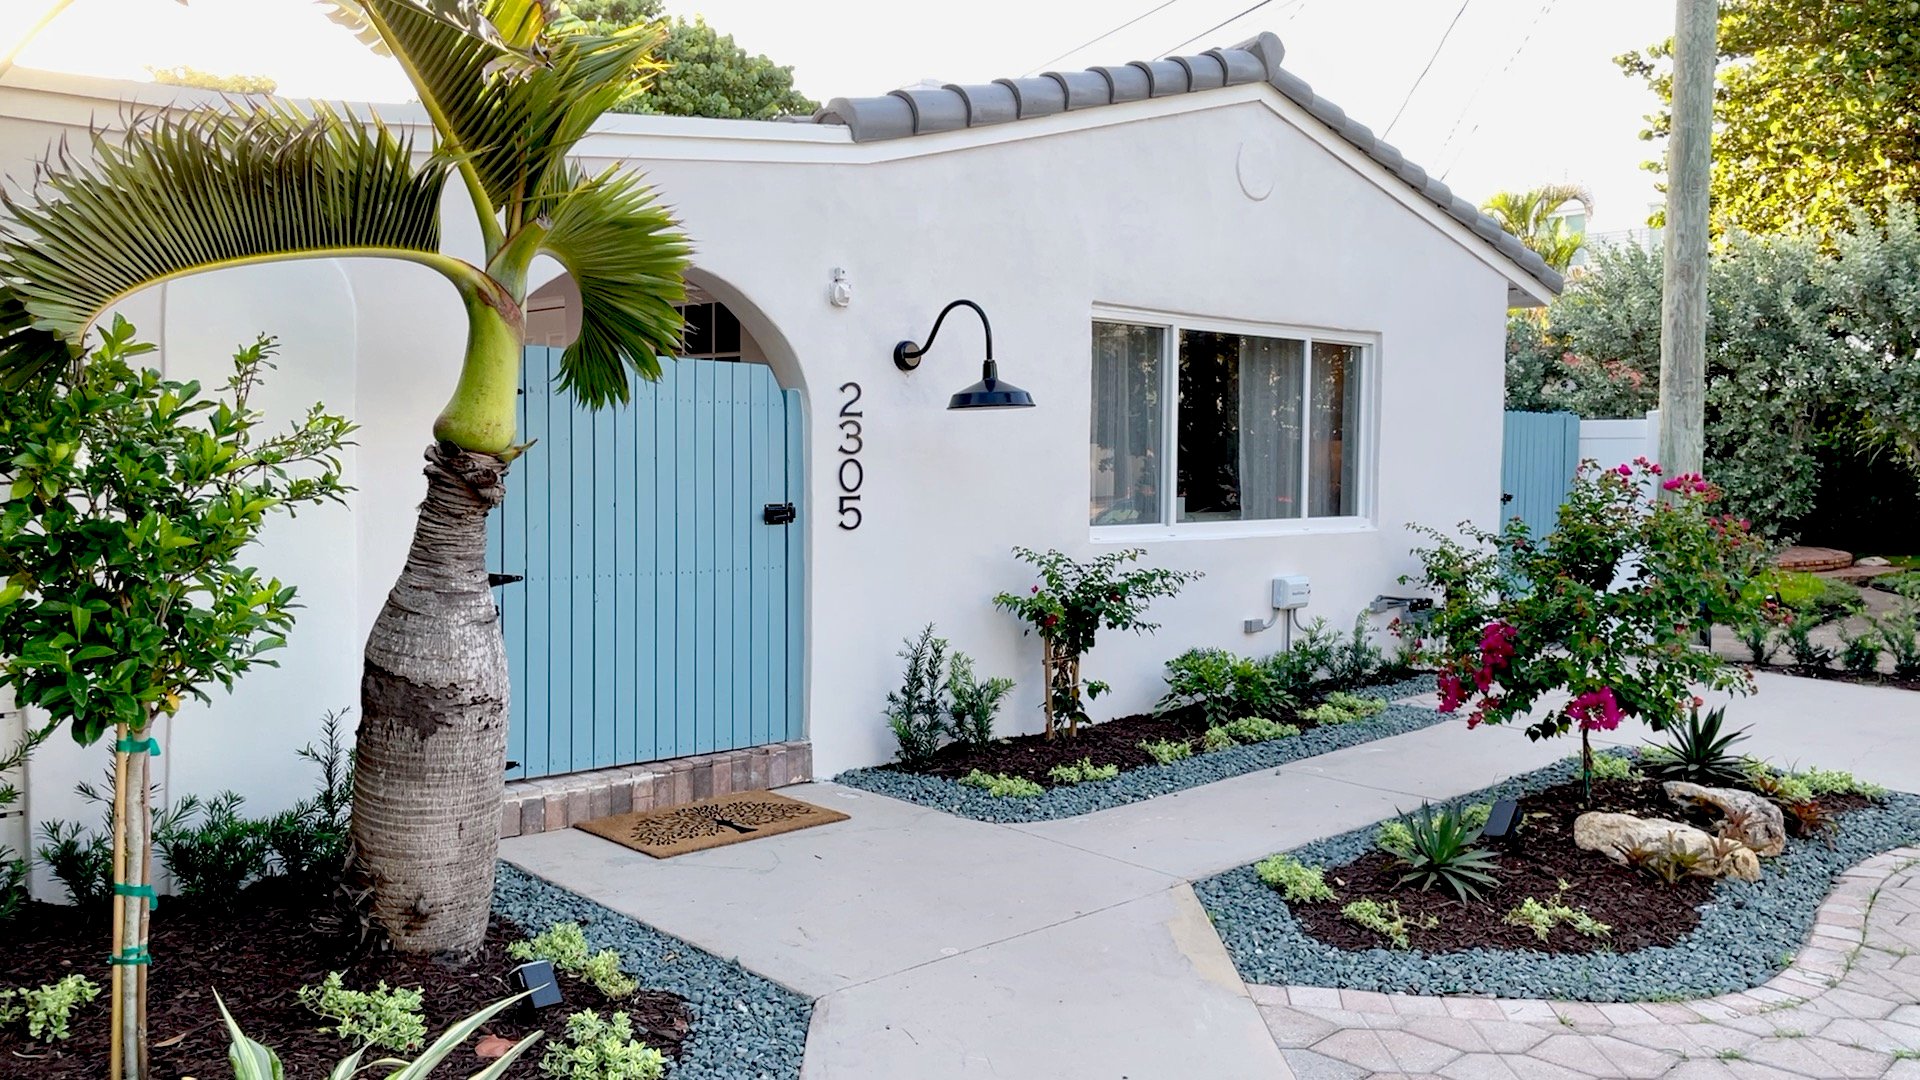 This captivating quaint beach cottage is just steps away from the Ocean.